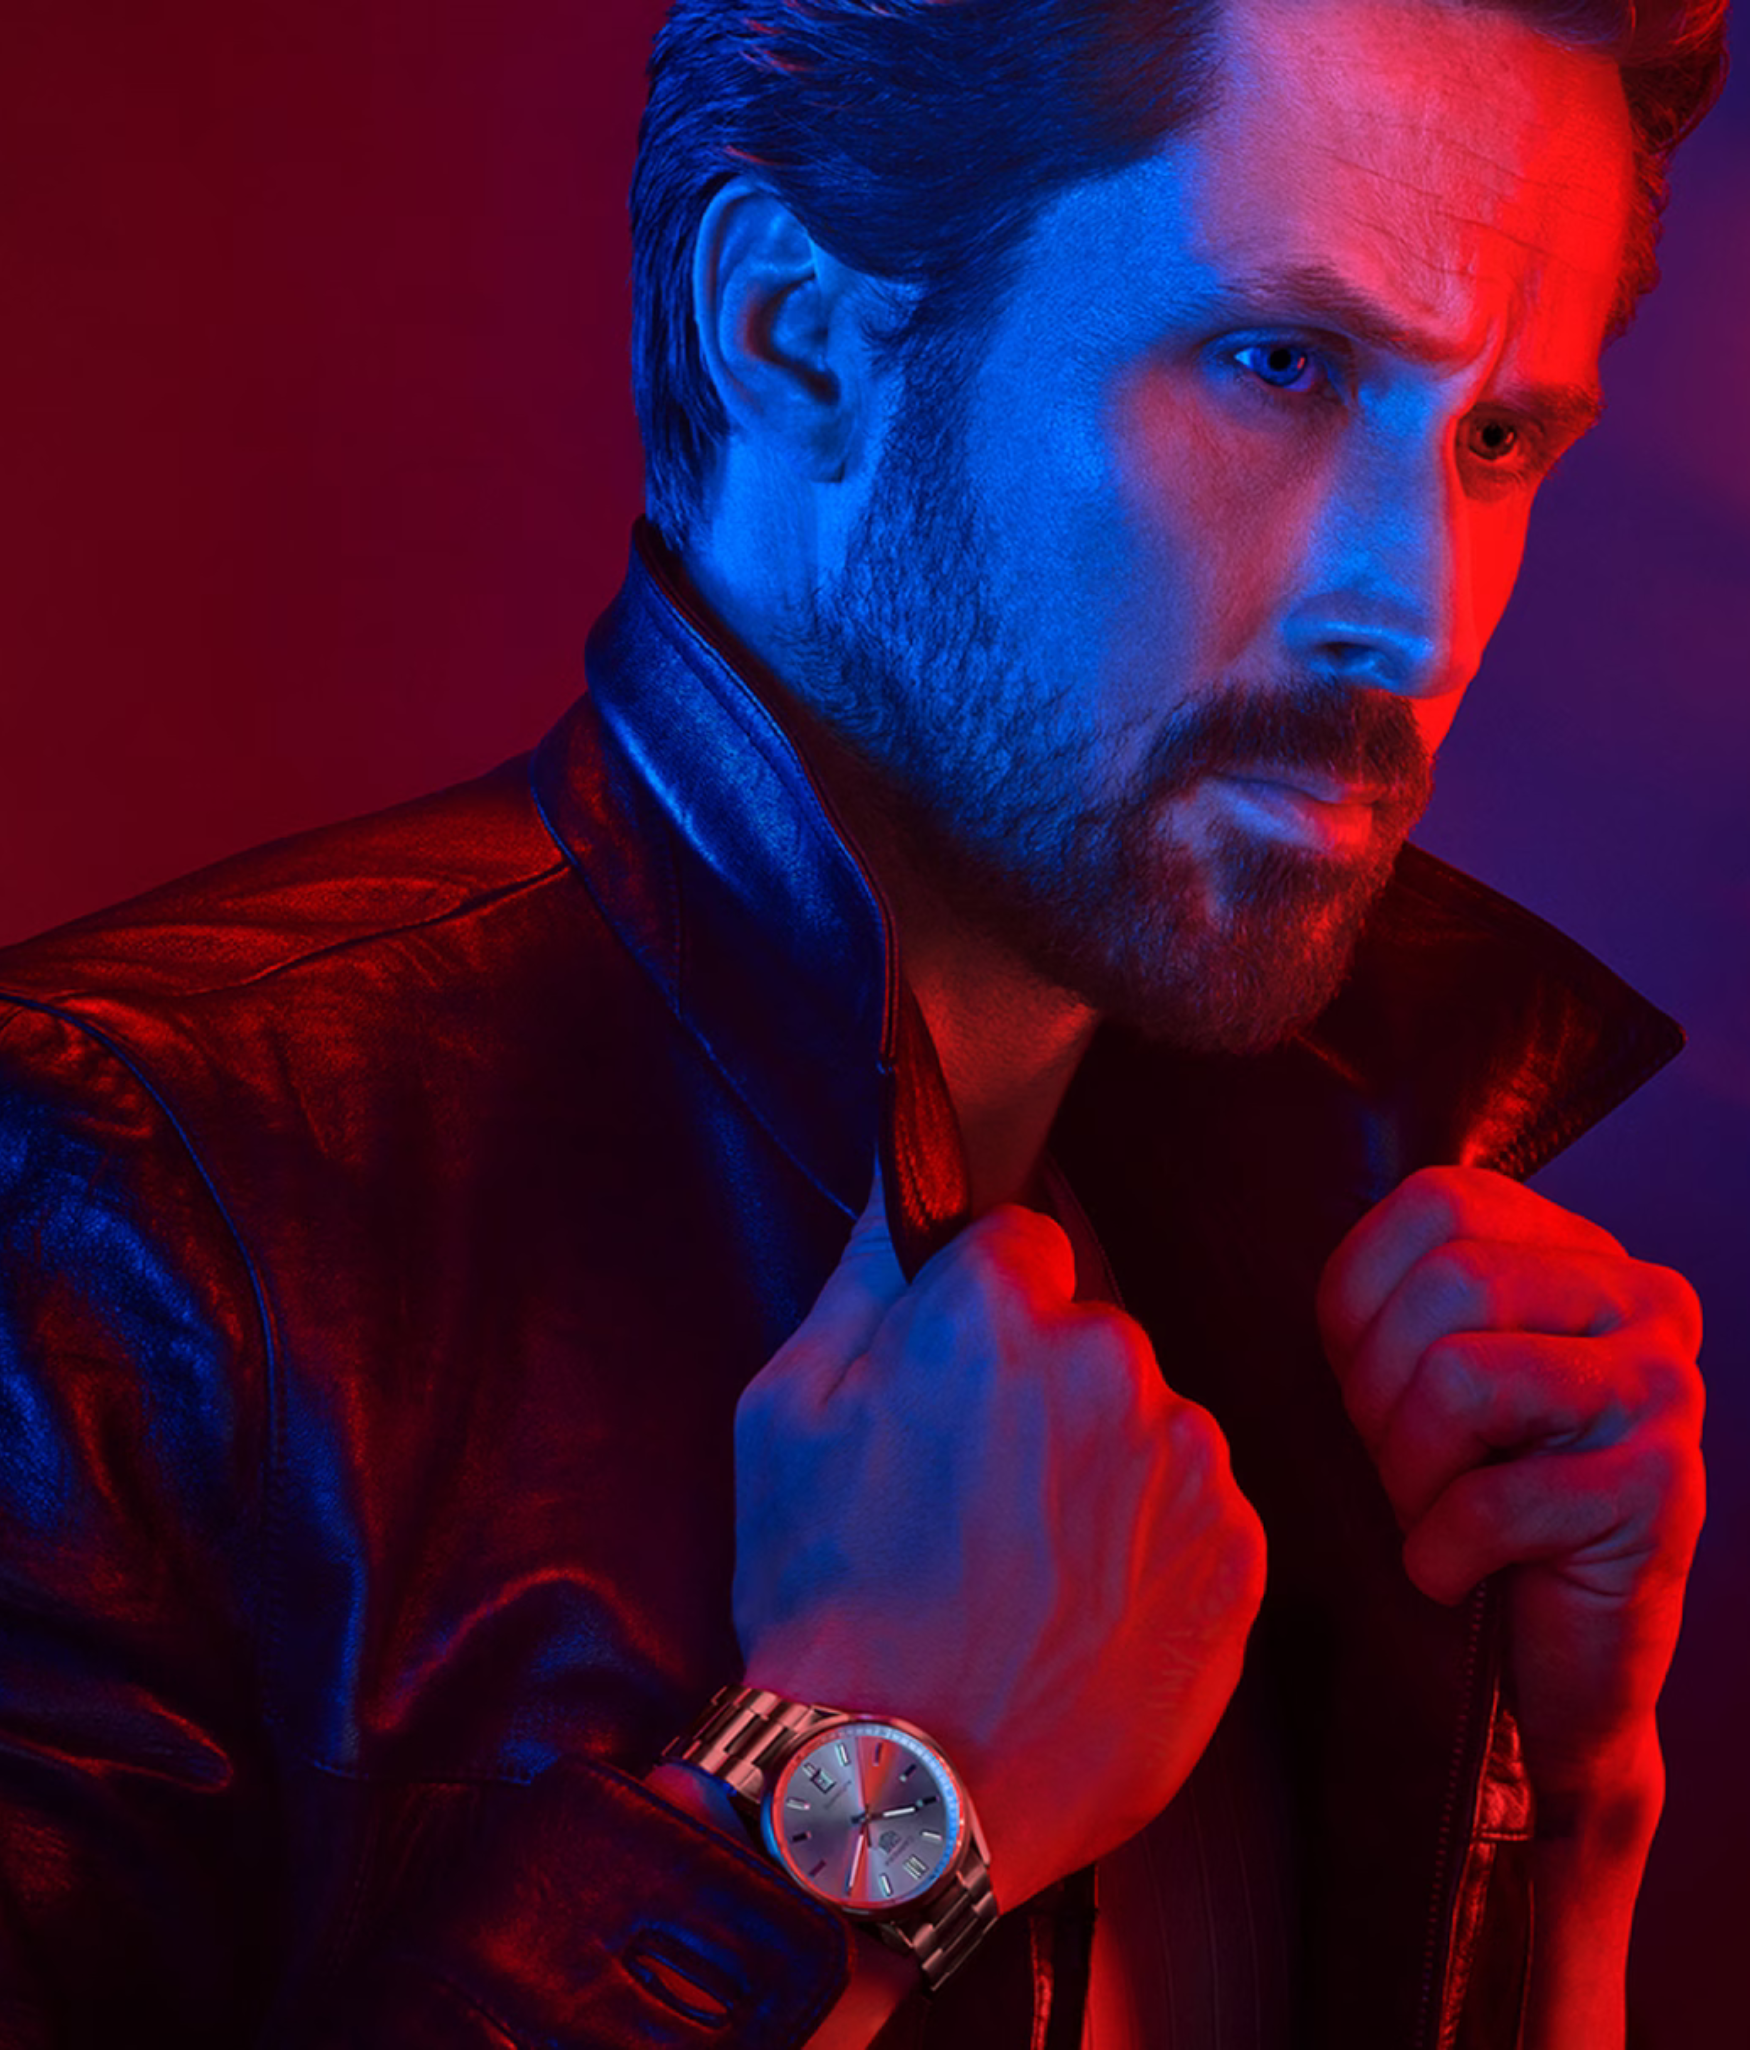 TAG Heuer brand ambassador Ryan Gosling elegantly showcases the TAG Heuer Carrera watch. Explore sophistication and style with TAG Heuer timepieces, endorsed by the renowned actor.